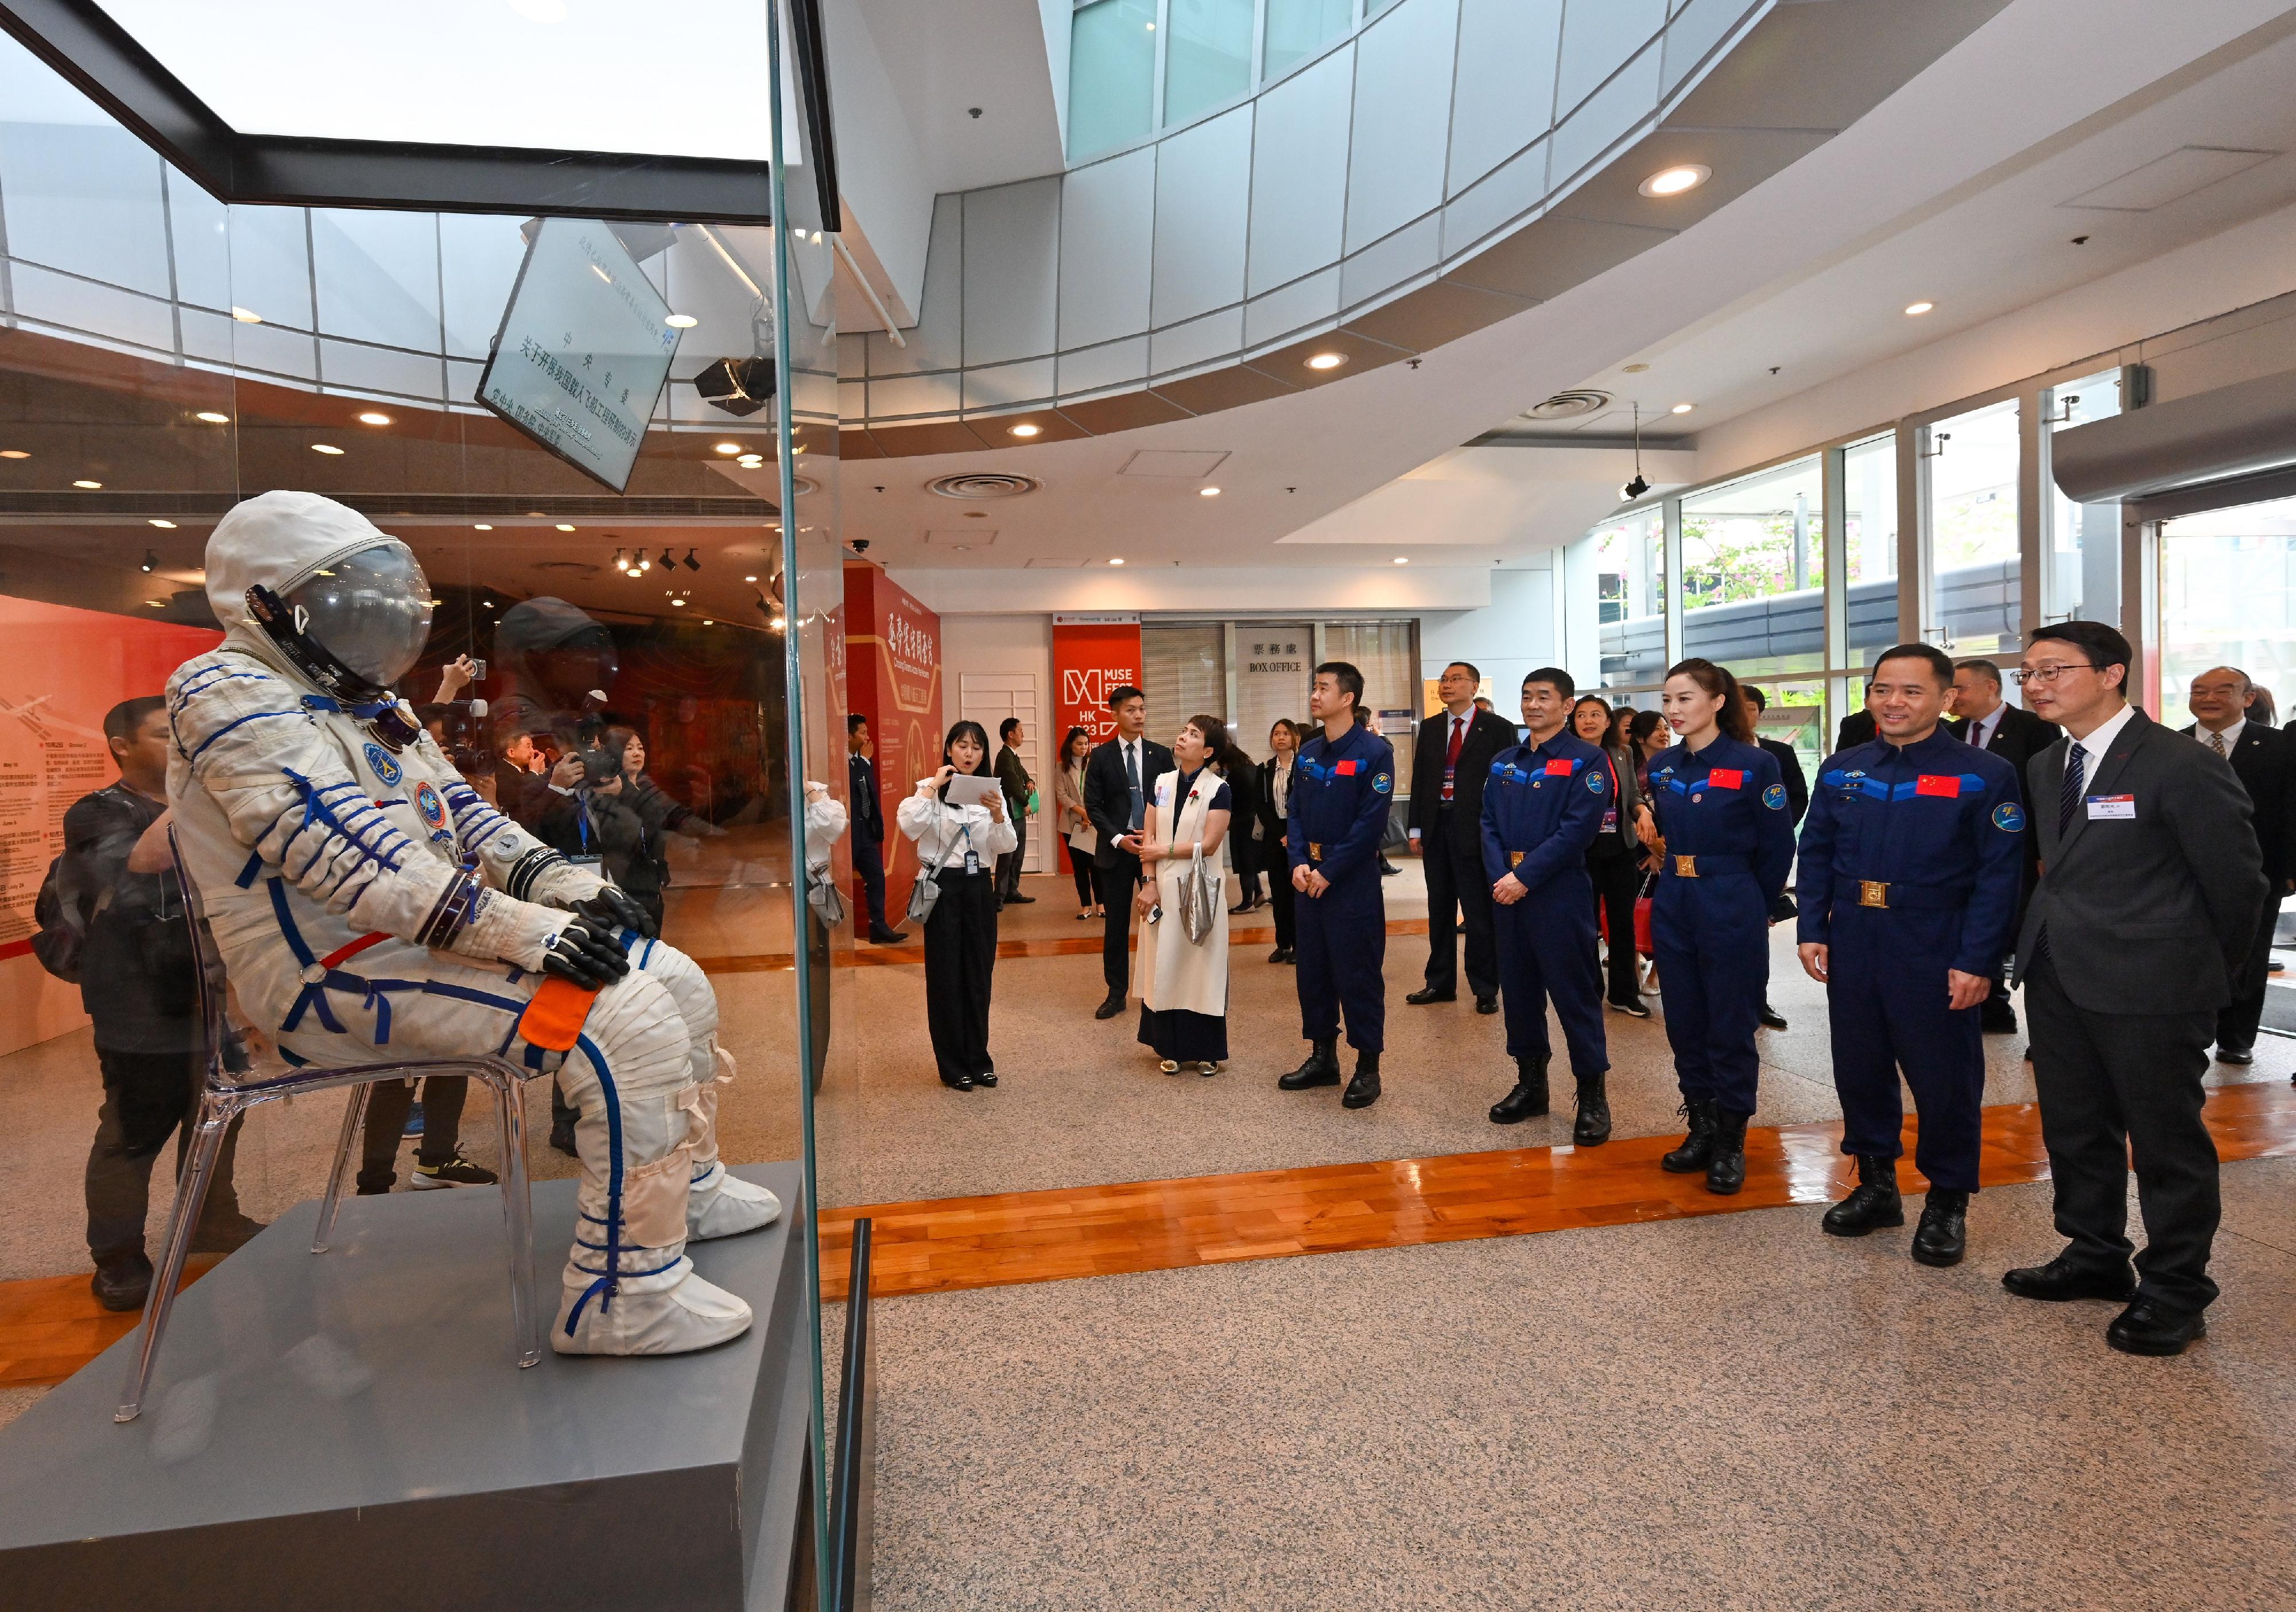 The China Manned Space delegation continued their visit to Hong Kong today (November 30). Photo shows (from front row, second right) Shenzhou-15 astronaut Mr Zhang Lu, Shenzhou-13 astronaut Ms Wang Yaping, Shenzhou-12 astronaut Mr Liu Boming, Shenzhou-14 mission commander Mr Chen Dong, and other delegation members touring the China Manned Space Exhibition.